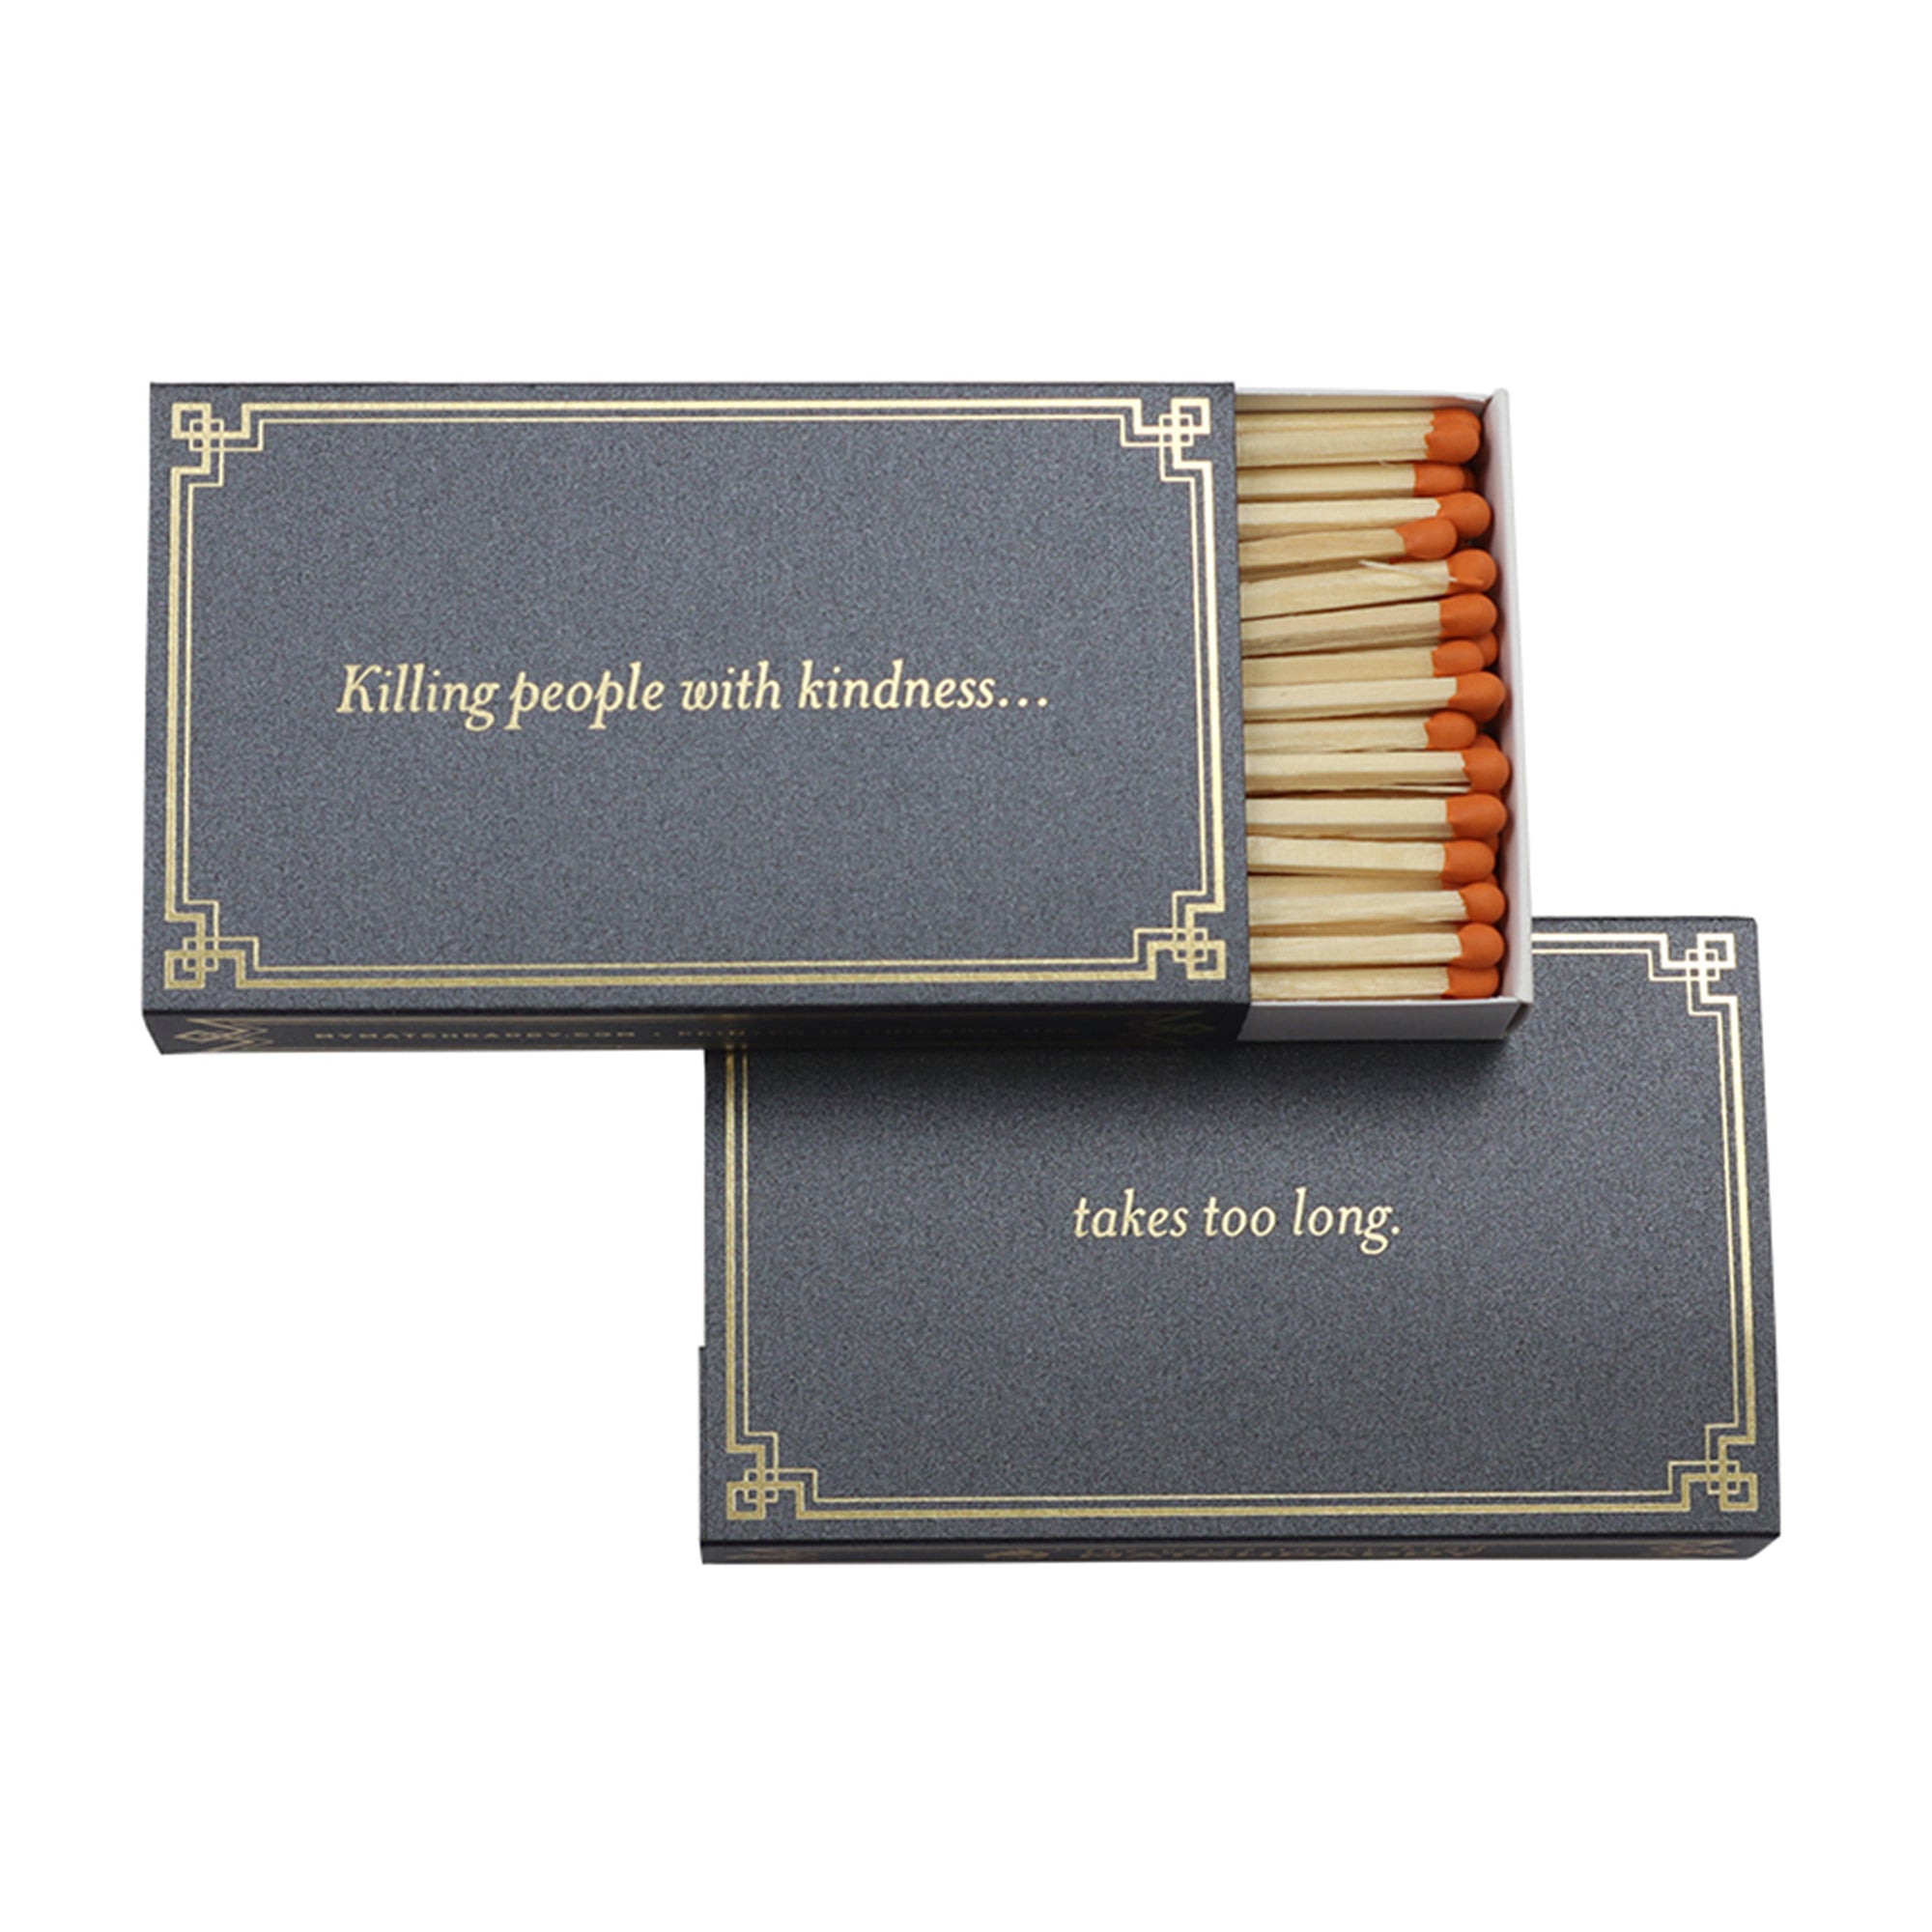 Killing People with Kindness Match Set